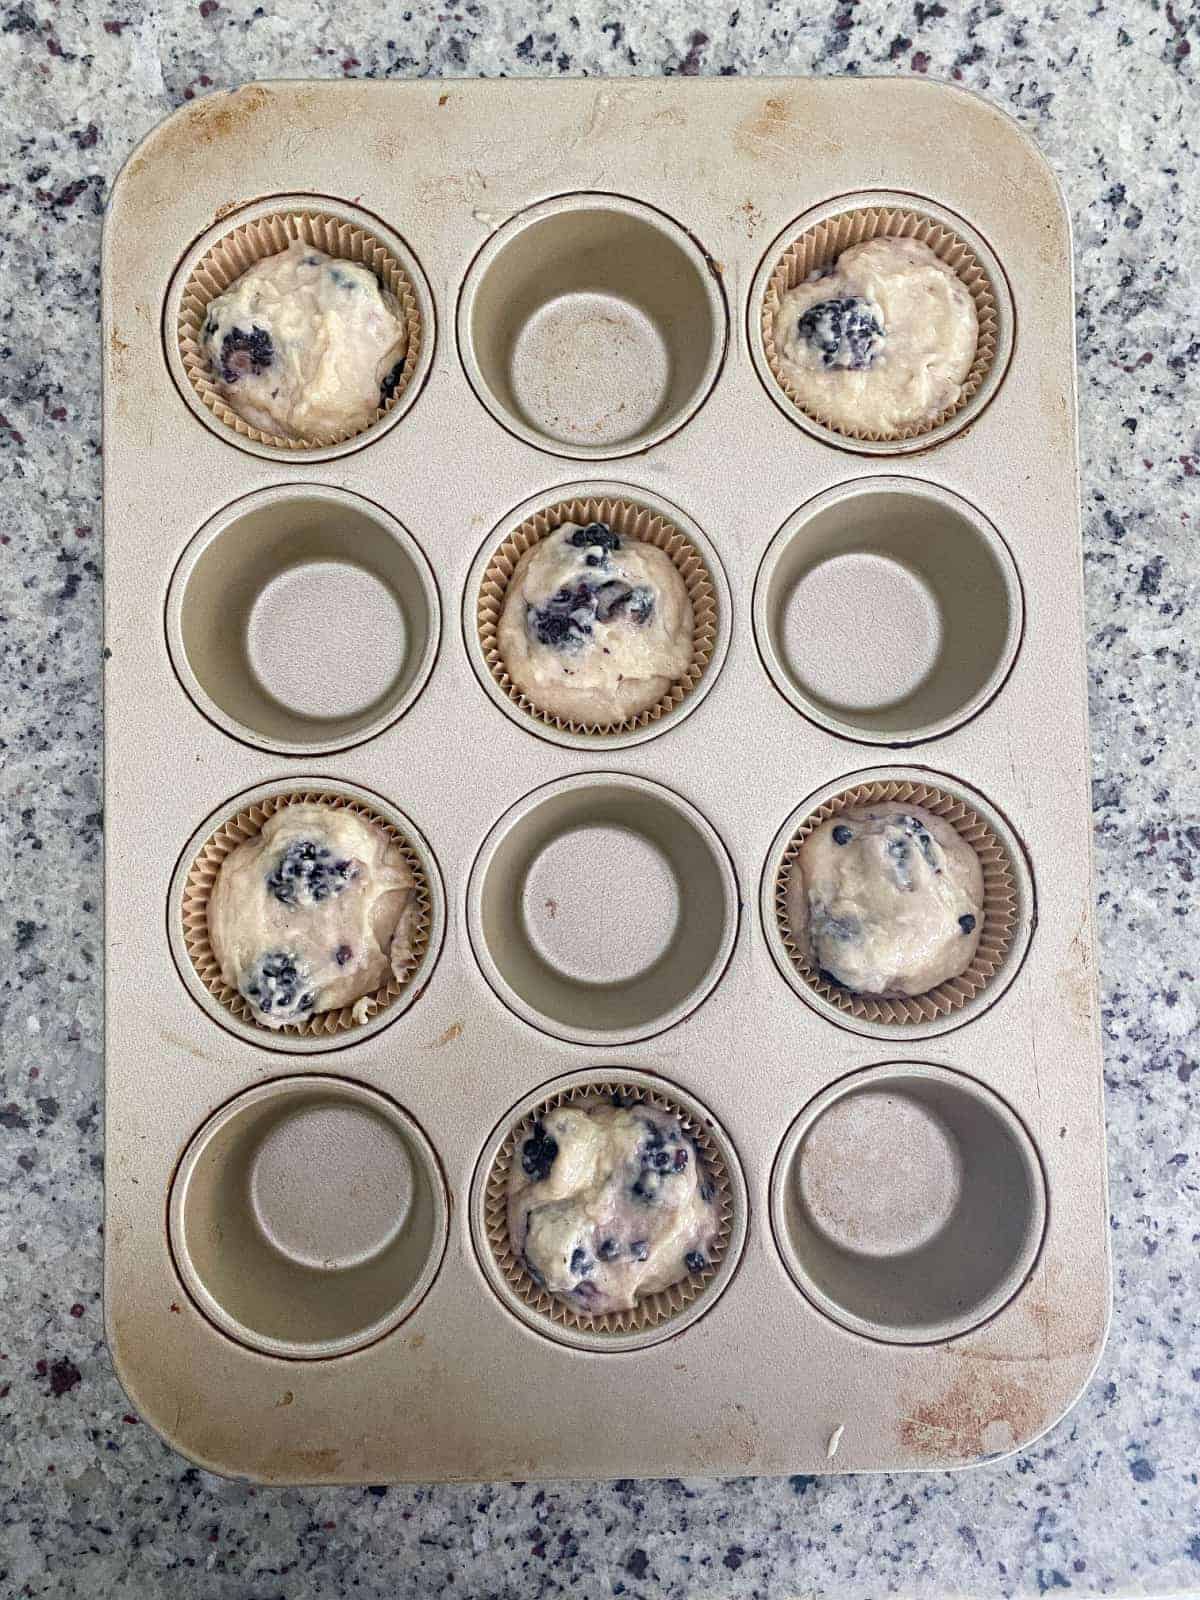 Top view of Blackberry Buttermilk Muffin batter in every other cup of muffin pan.